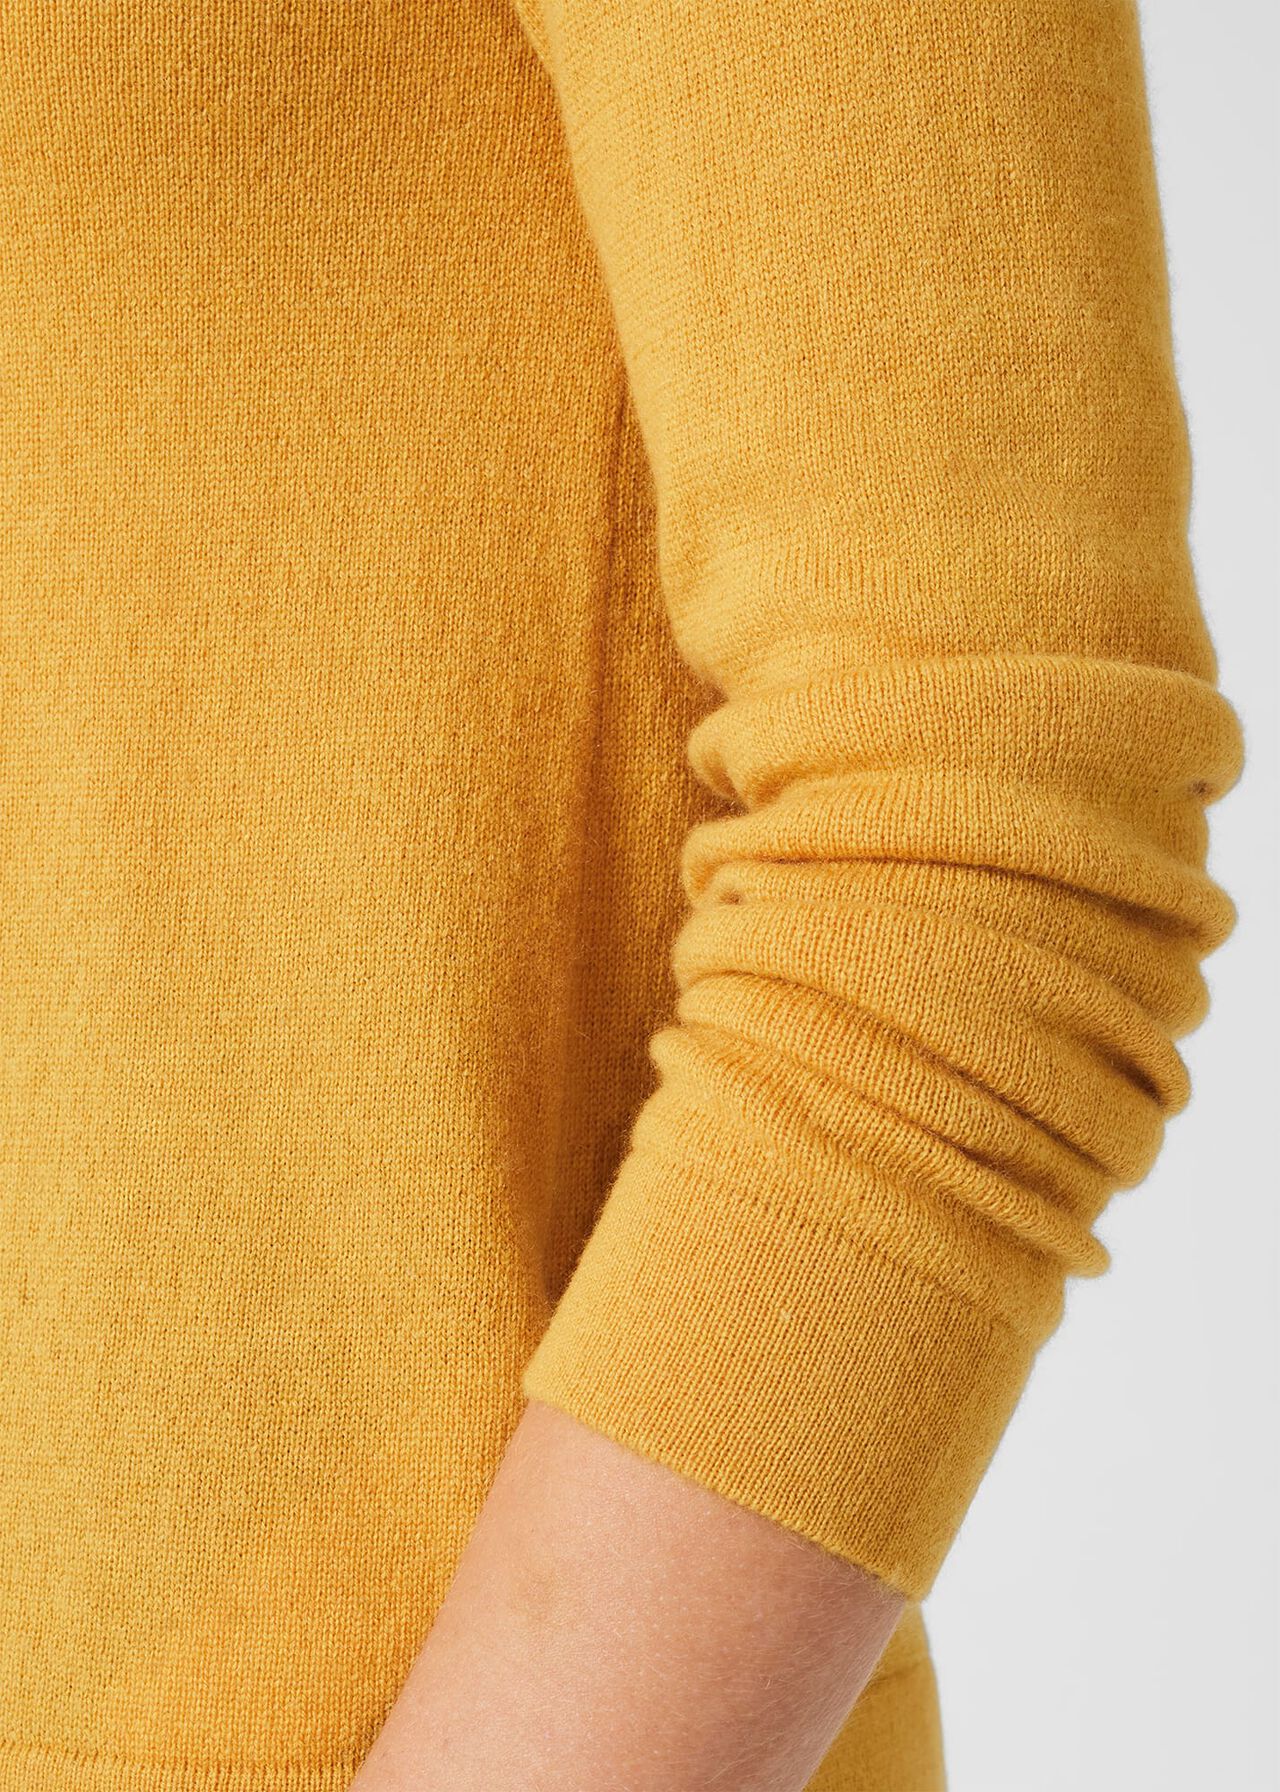 Audrey Wool Cashmere Sweater, Golden Yellow, hi-res